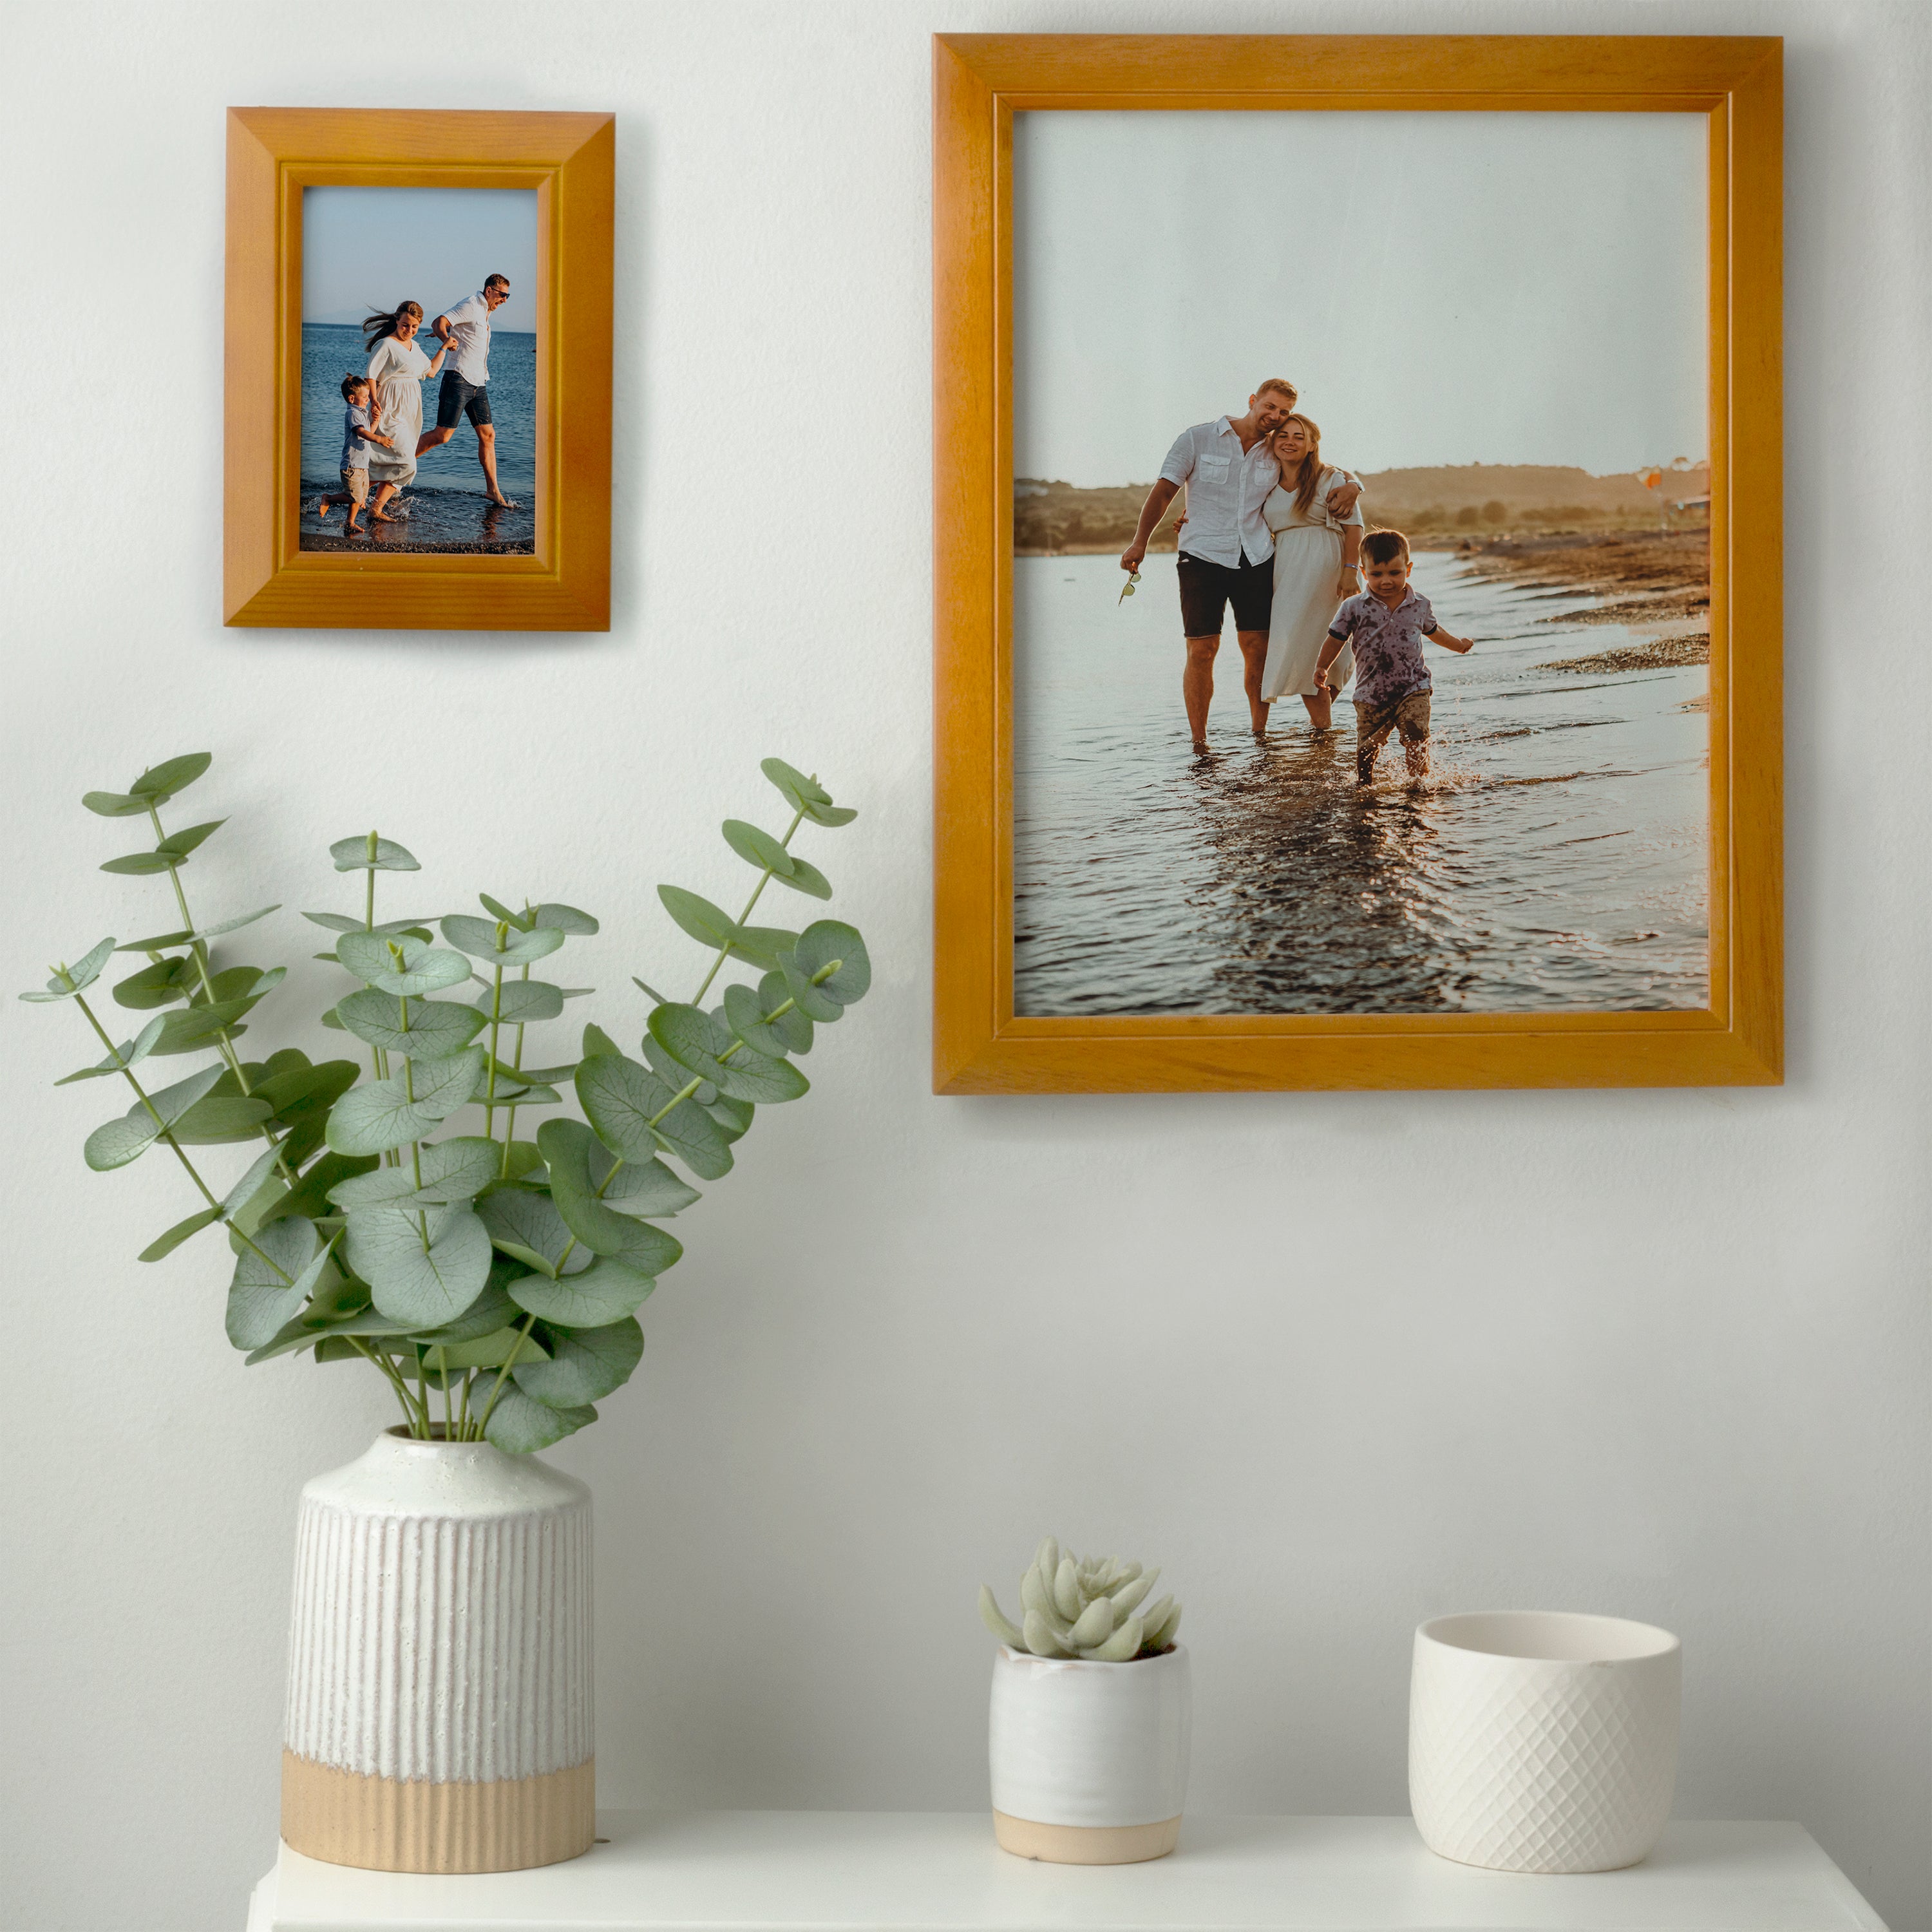 Classic Wood Picture Frames